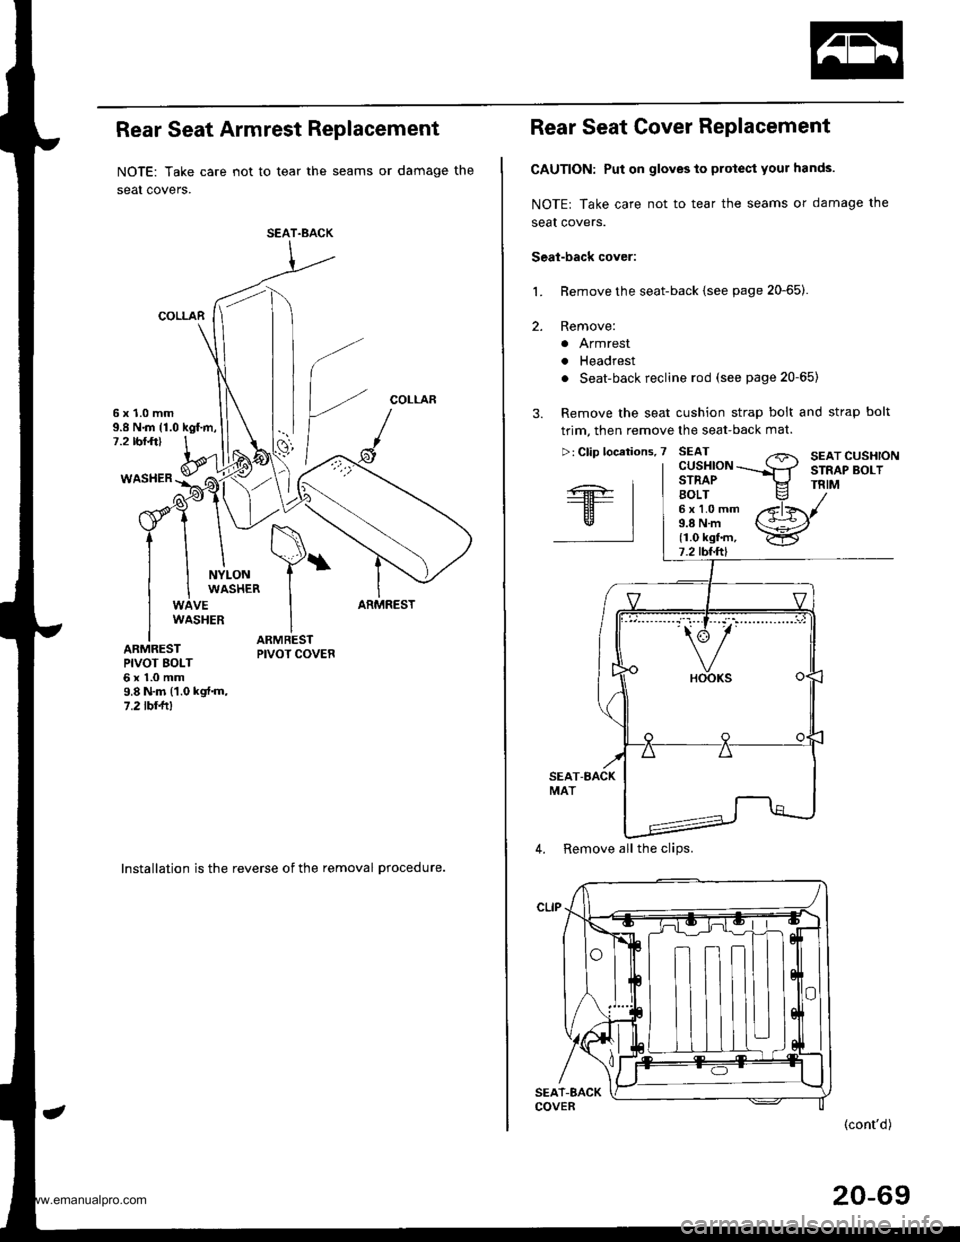 HONDA CR-V 1997 RD1-RD3 / 1.G Workshop Manual 
Rear Seat Armrest Replacement
NOTE: Take care not to tear the seams or damage the
seat covers.
COLLAR
COLLAR6x1.0mm9.8 N.m {1.0 kgf.m,7.2 rbr.ft)
WASHER
NYLONWASHER
VEARMRESTWASHER
ARMRESTPIVOT BOLT6